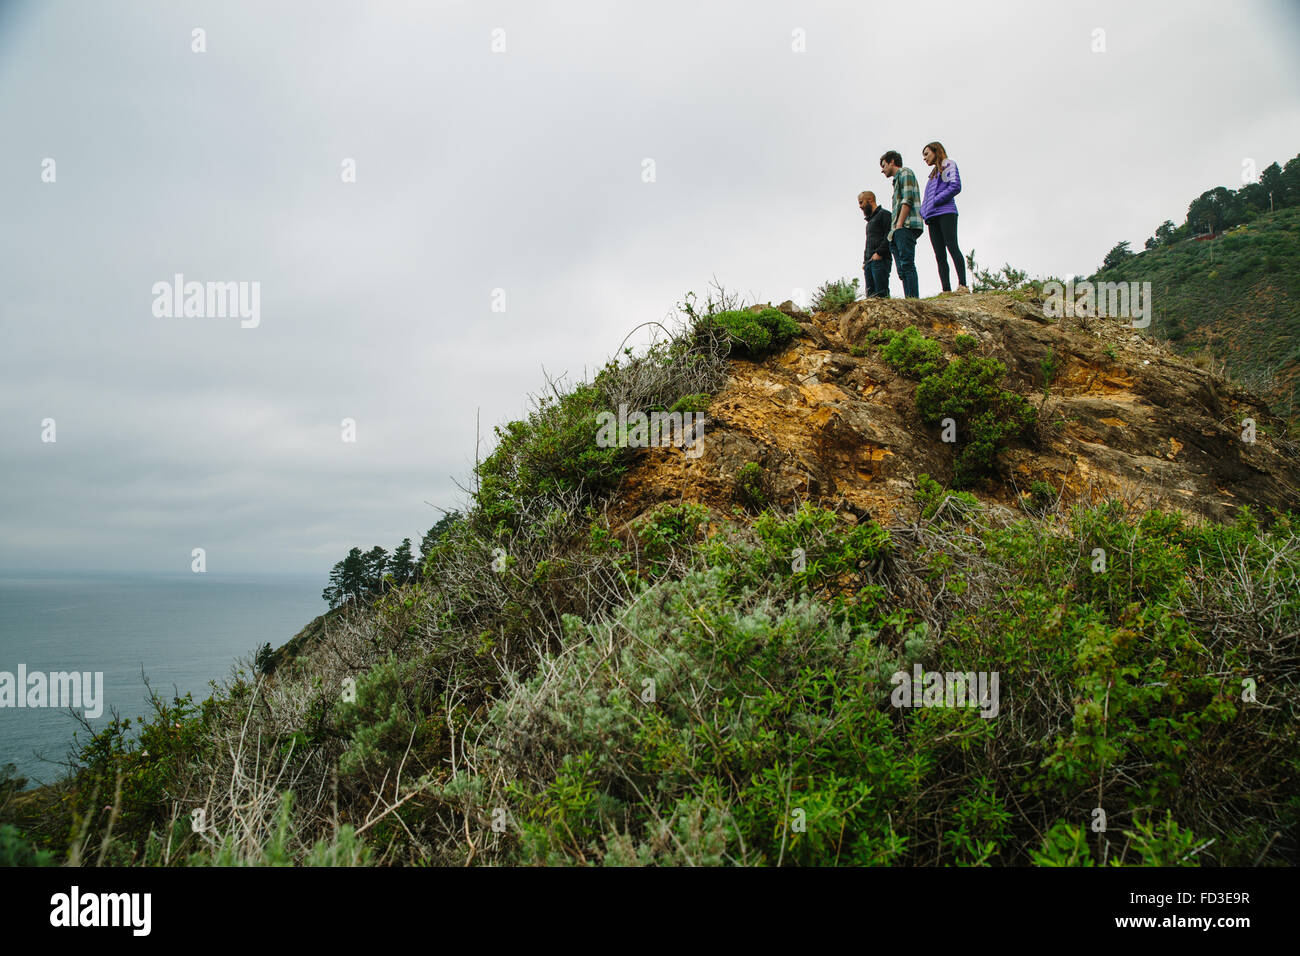 Friends on an adventure in Big Sur, California. Stock Photo